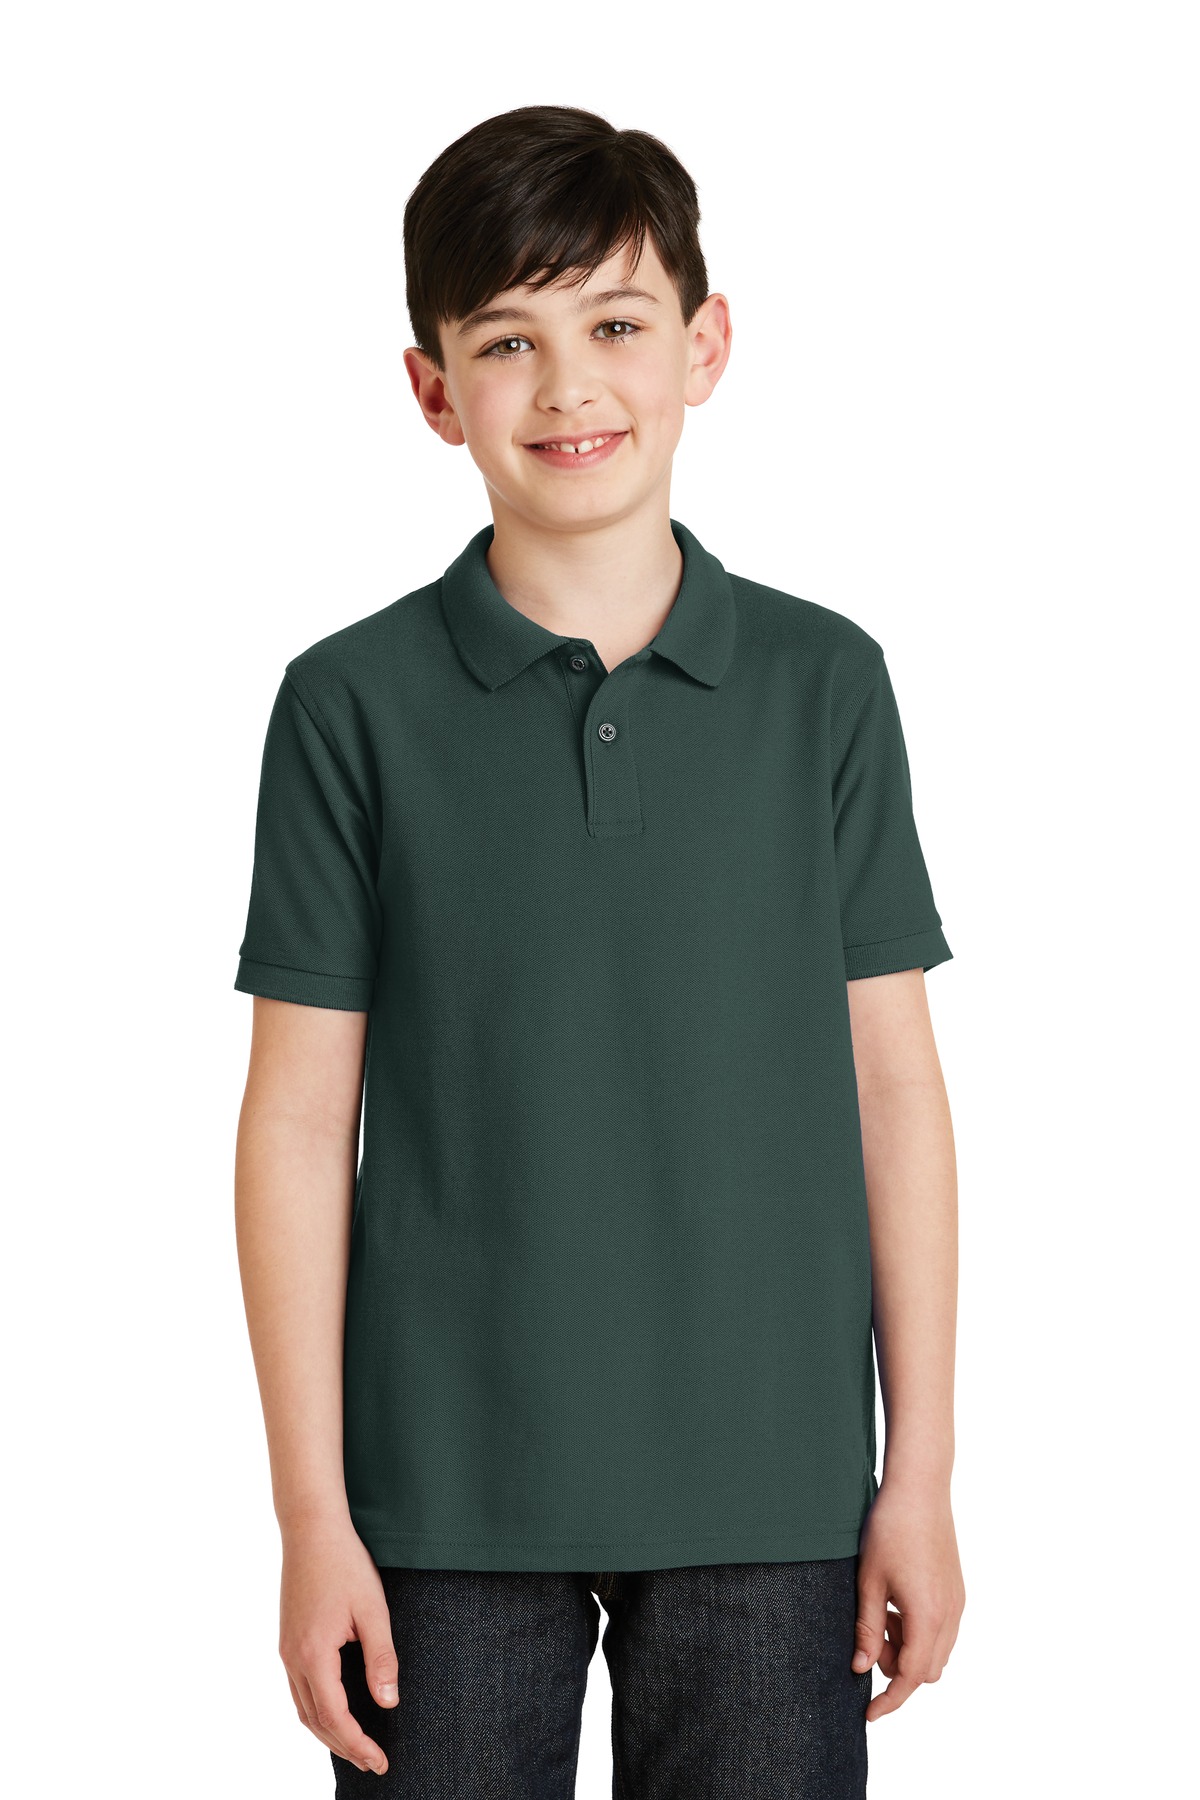 Y500 NEW Logo embroidered Youth Silk Touch Polo